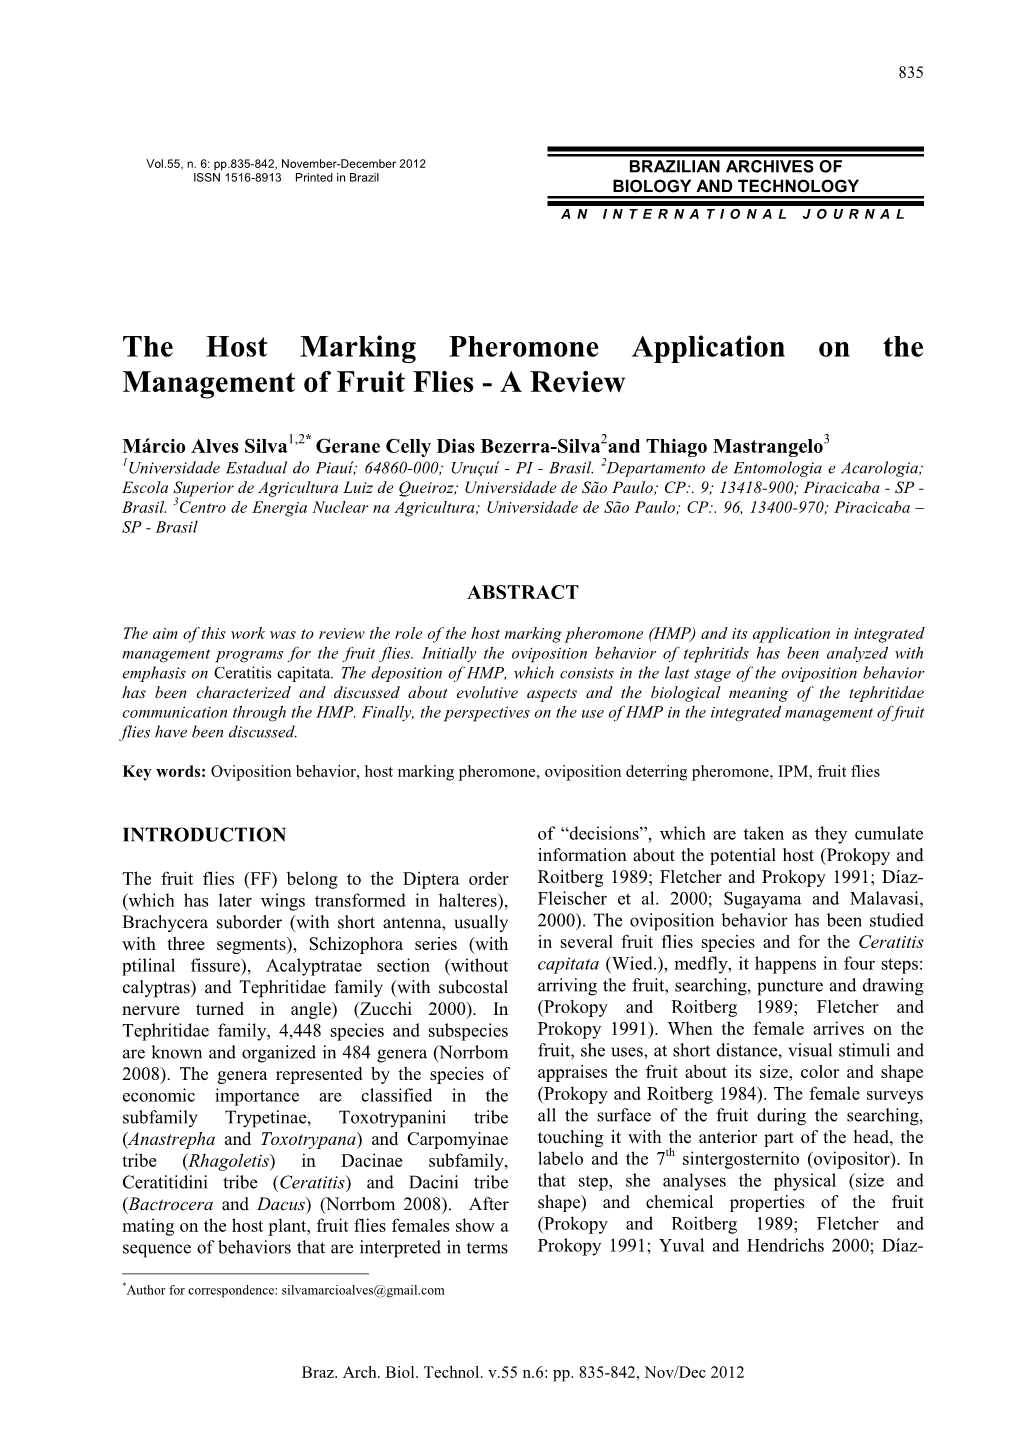 The Host Marking Pheromone Application on the Management of Fruit Flies - a Review